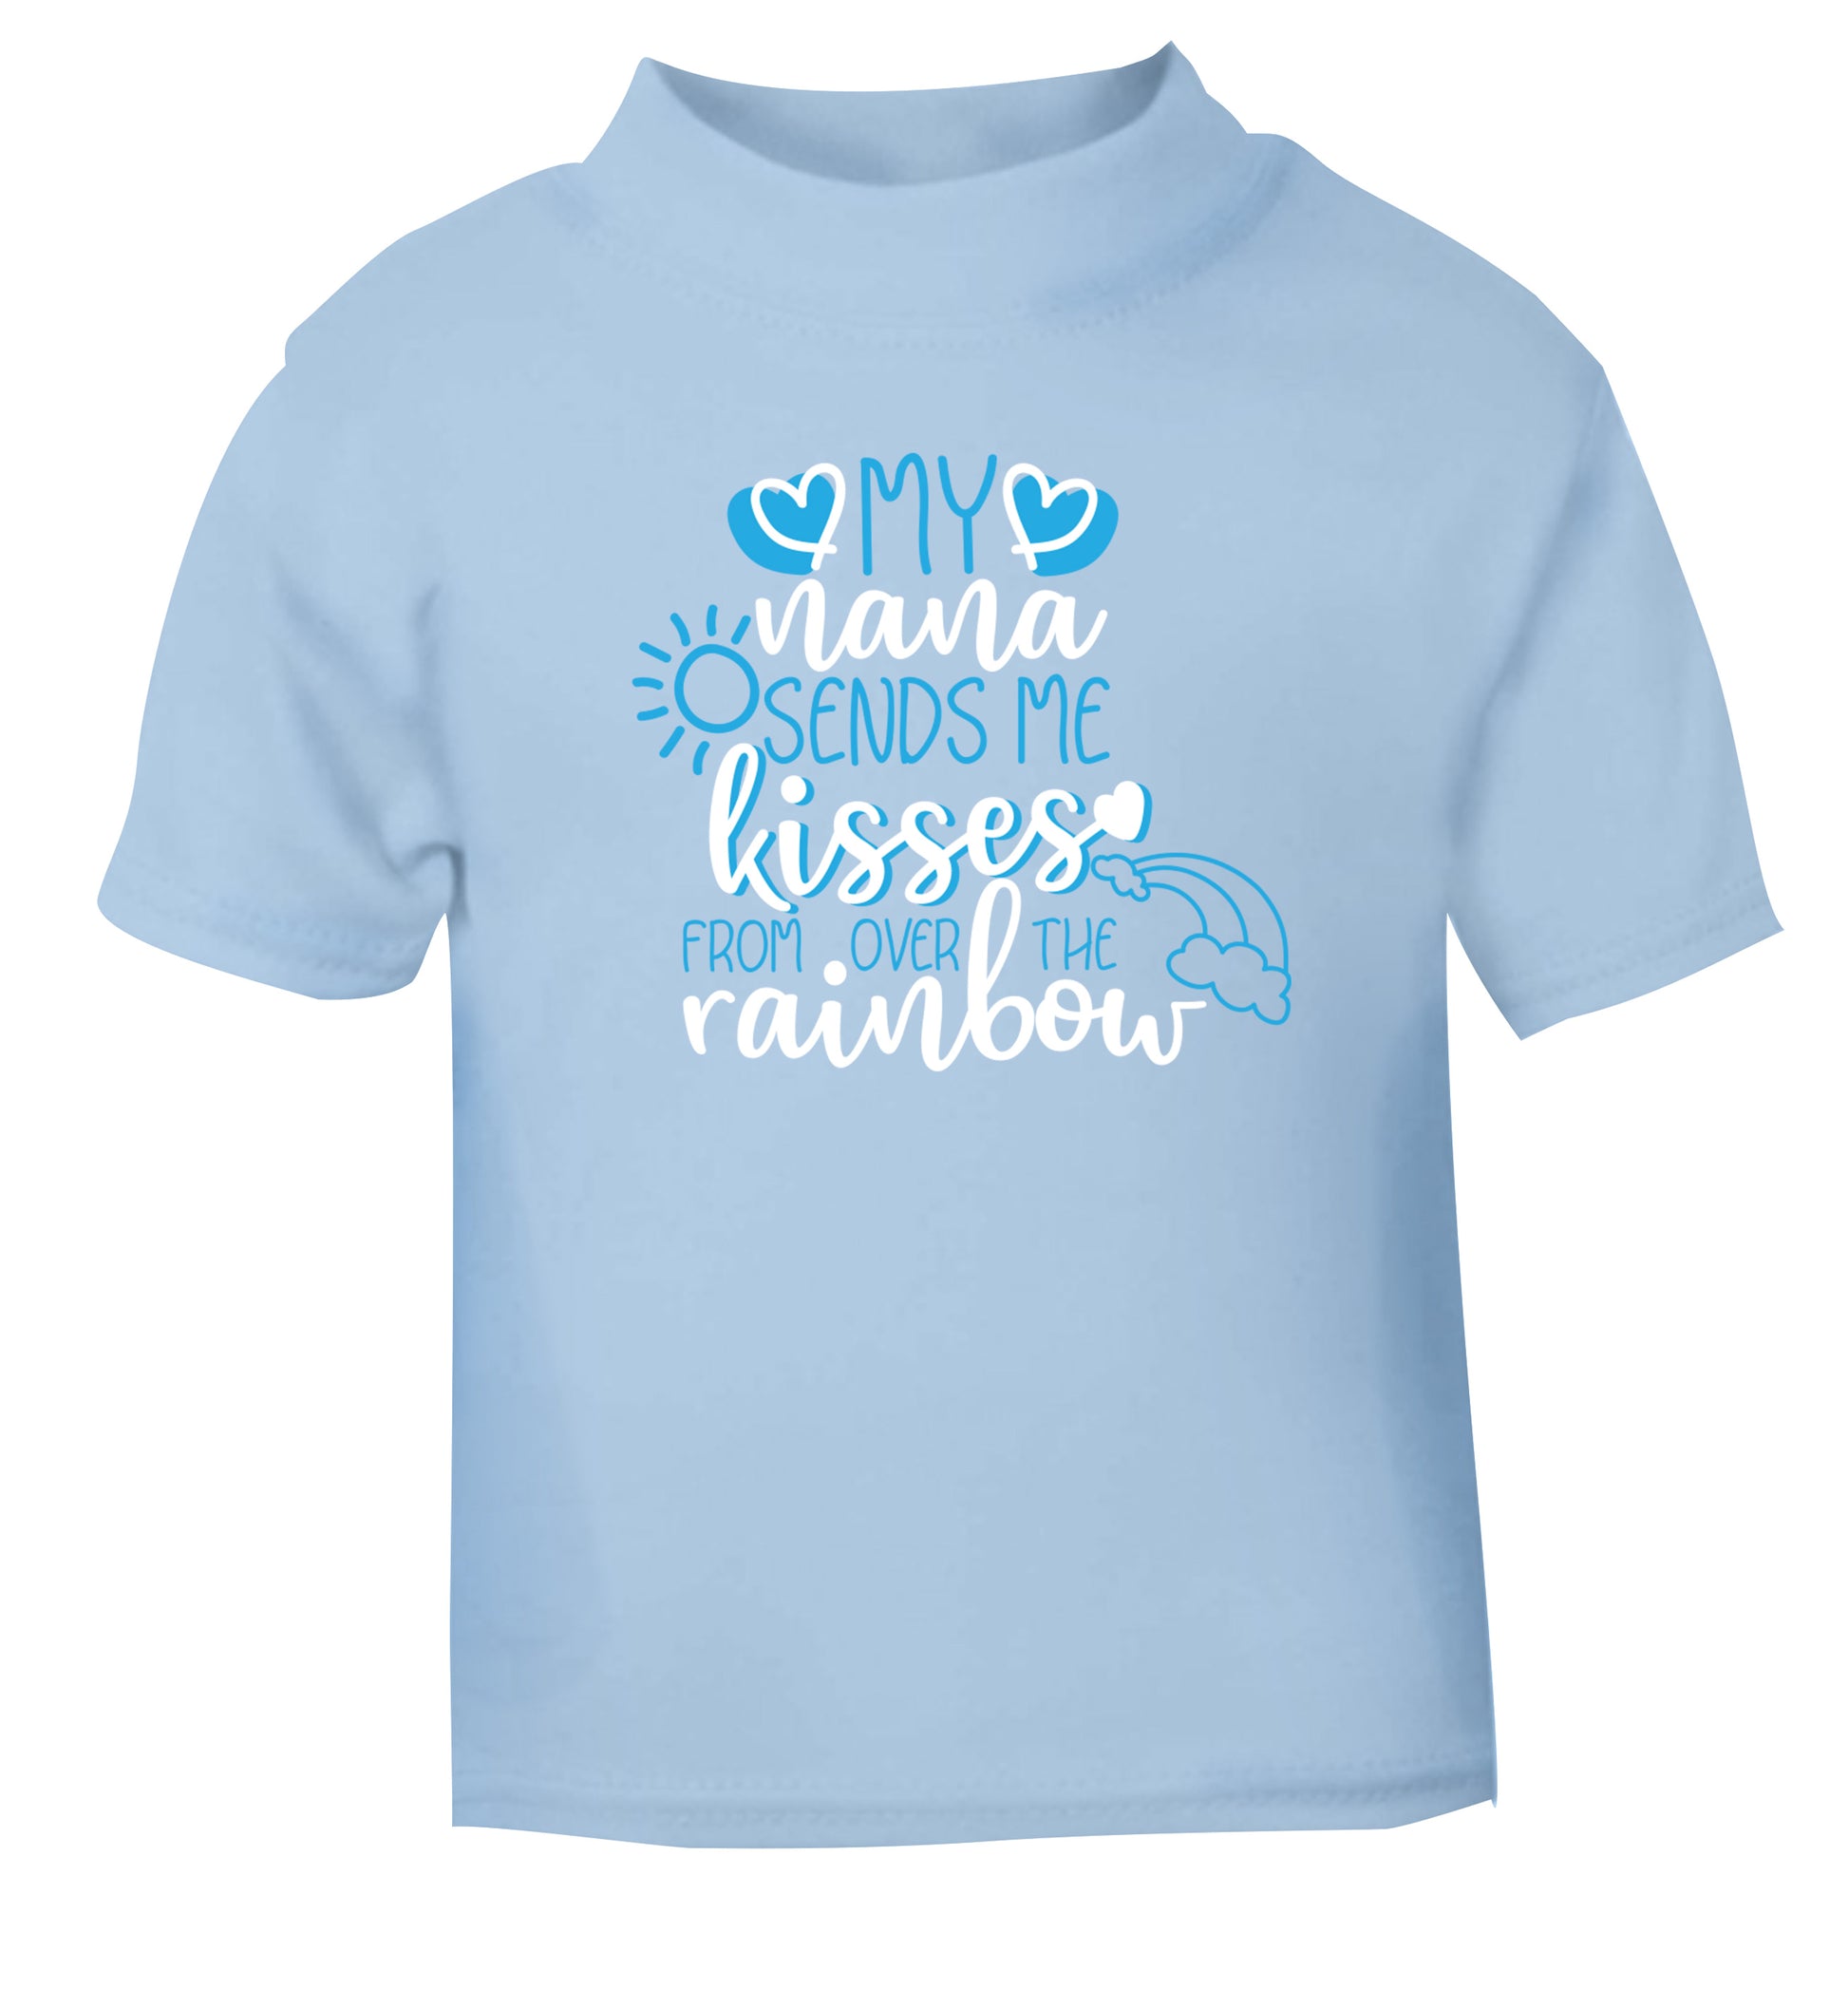 My nana sends me kisses from over the rainbow light blue Baby Toddler Tshirt 2 Years